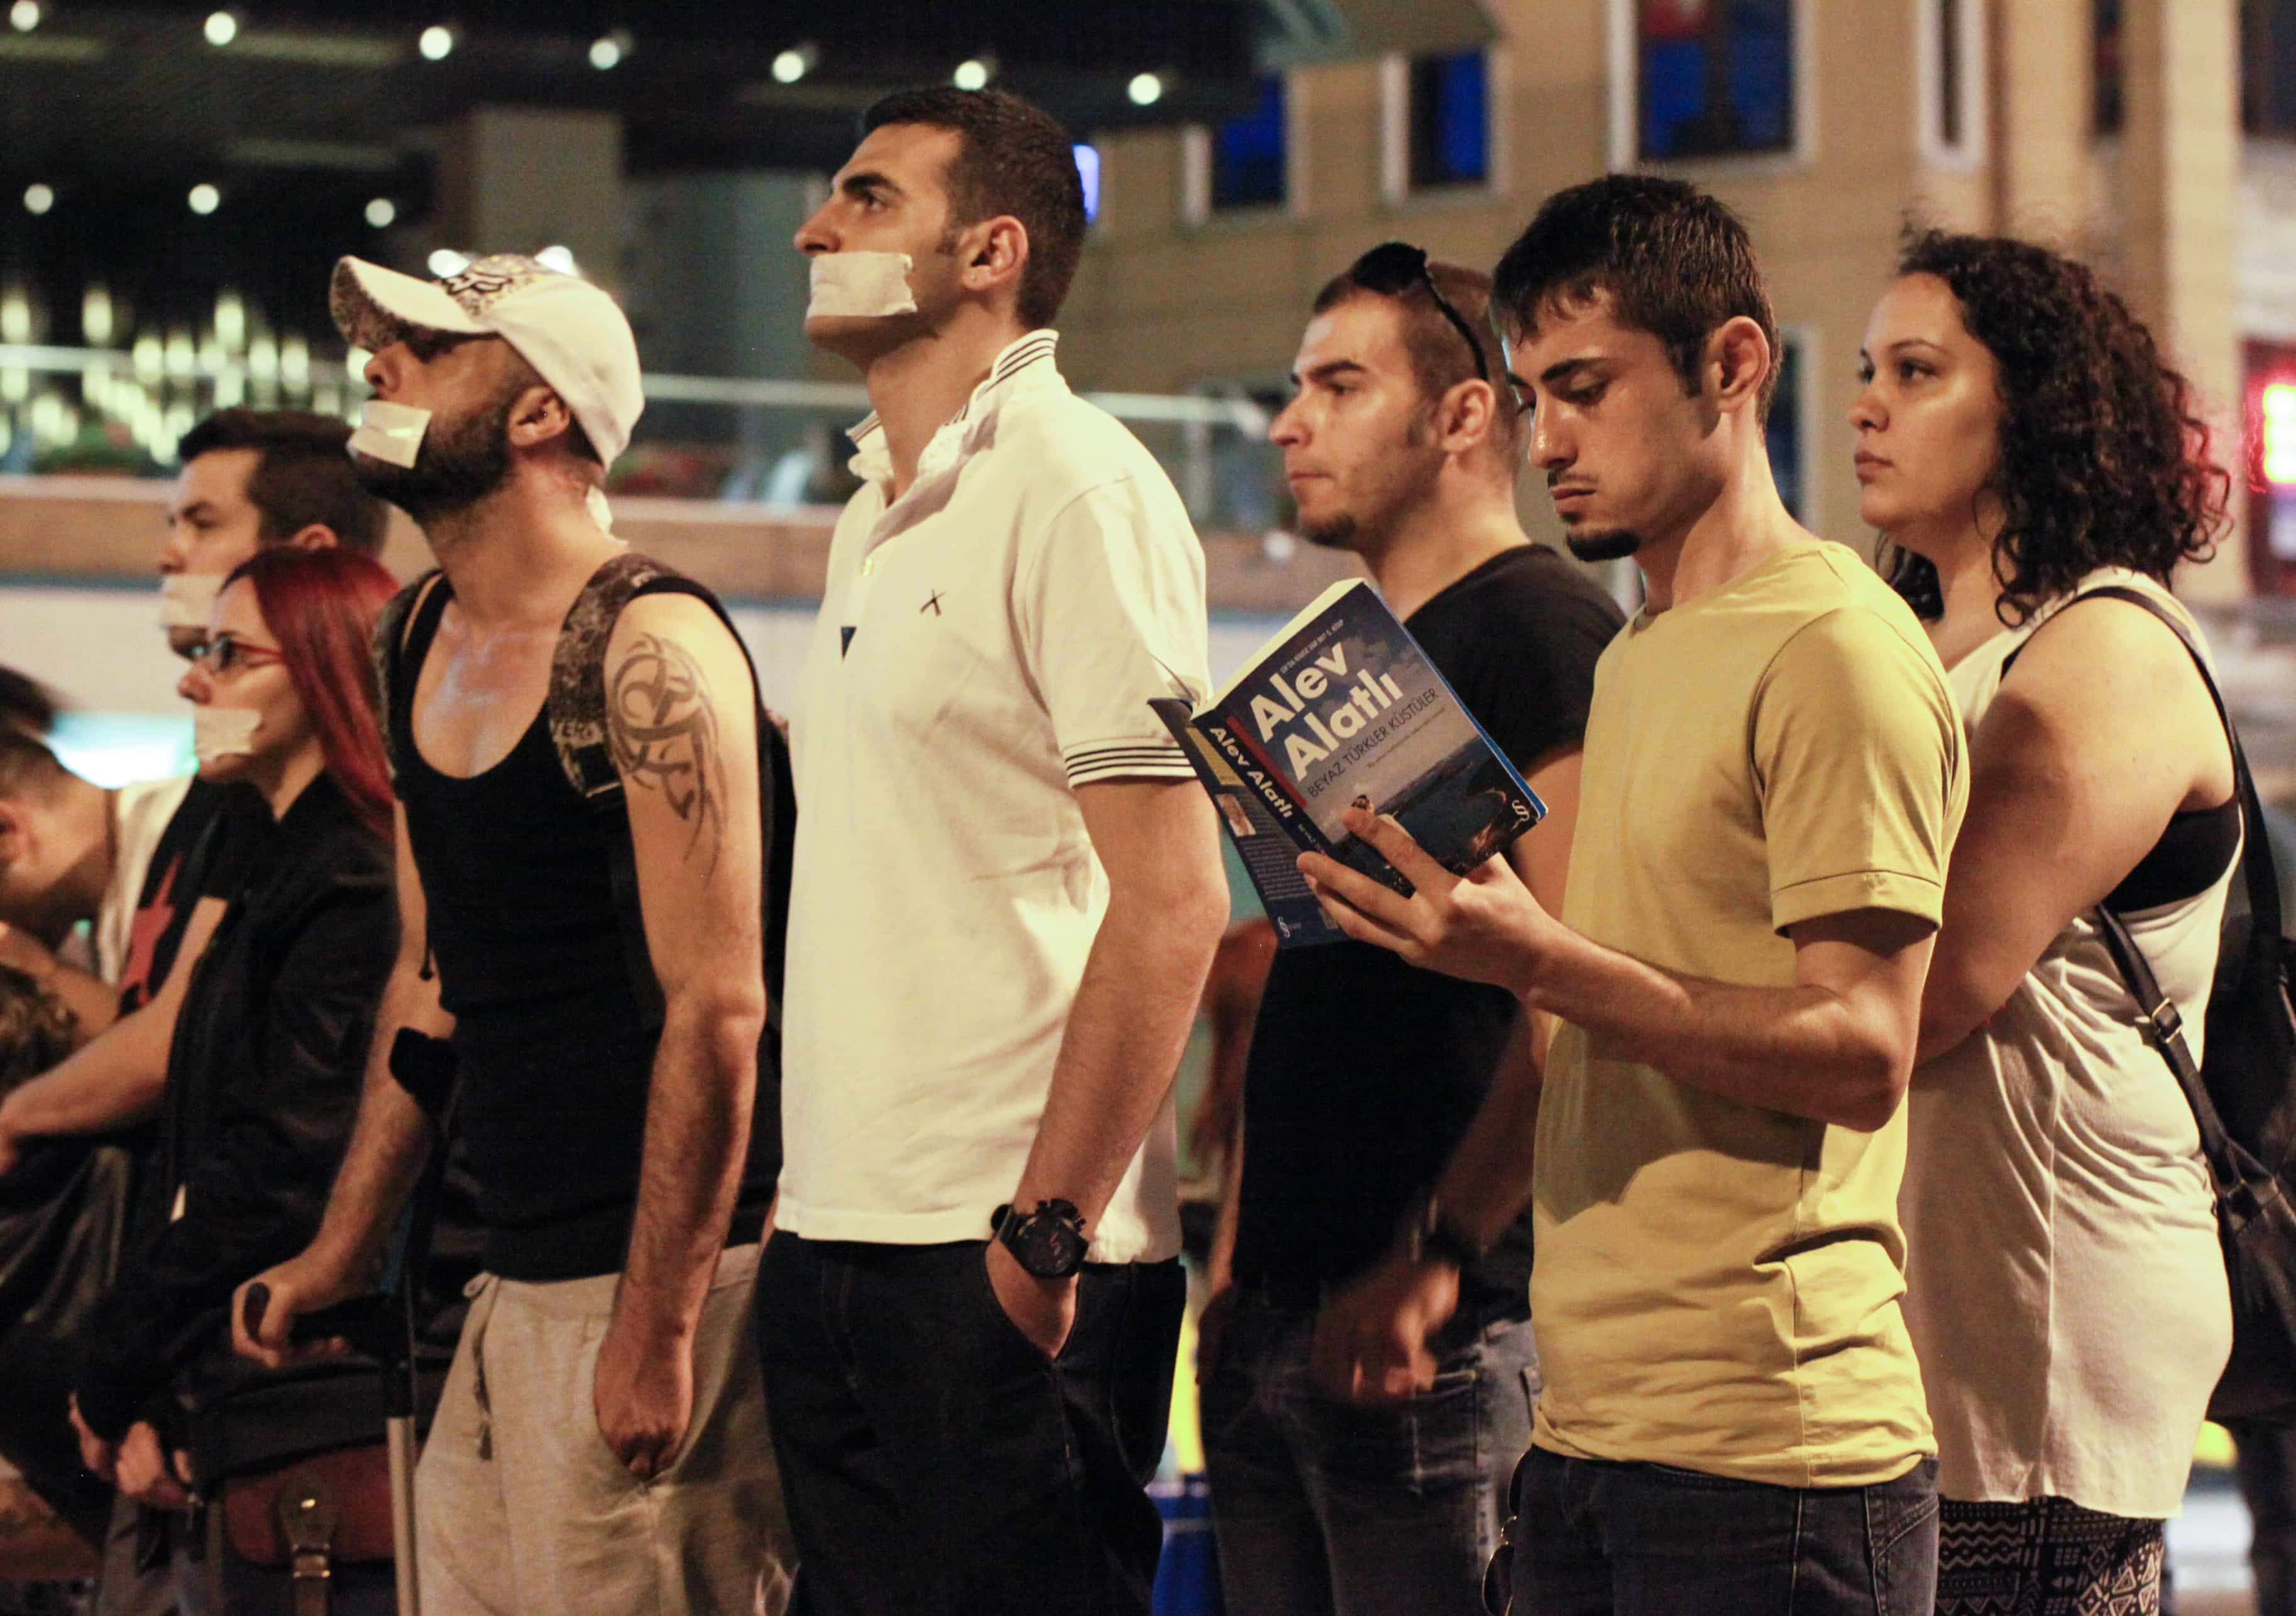 People standing in protest in Istanbul with a man reading a book by Alev Alatli, a writer who has experienced censorship in Turkey, on 18 June 2013., Miguel Crarminati/Demotix